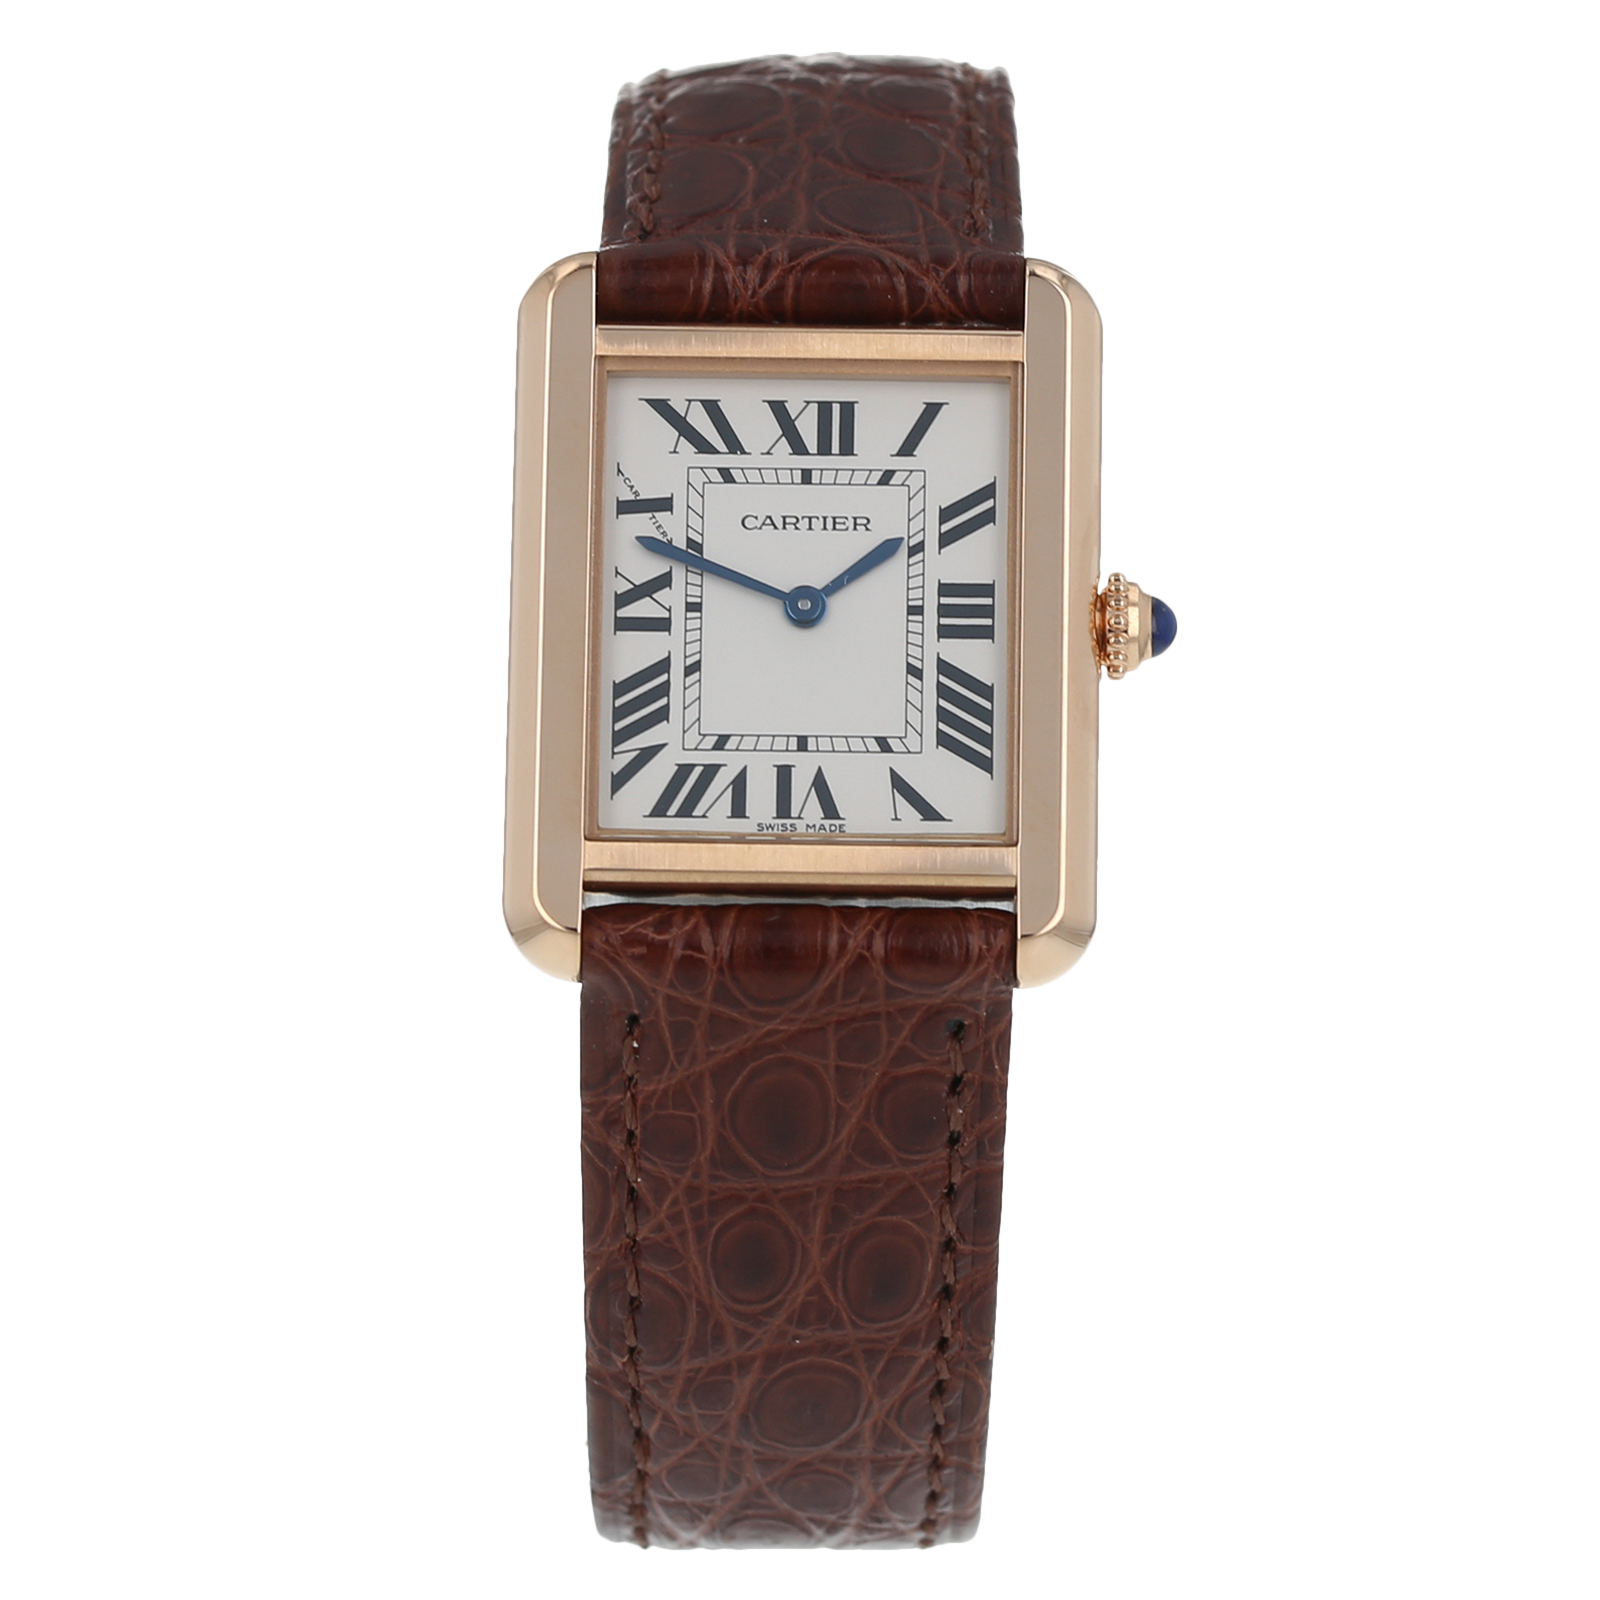 second hand ladies cartier tank watches